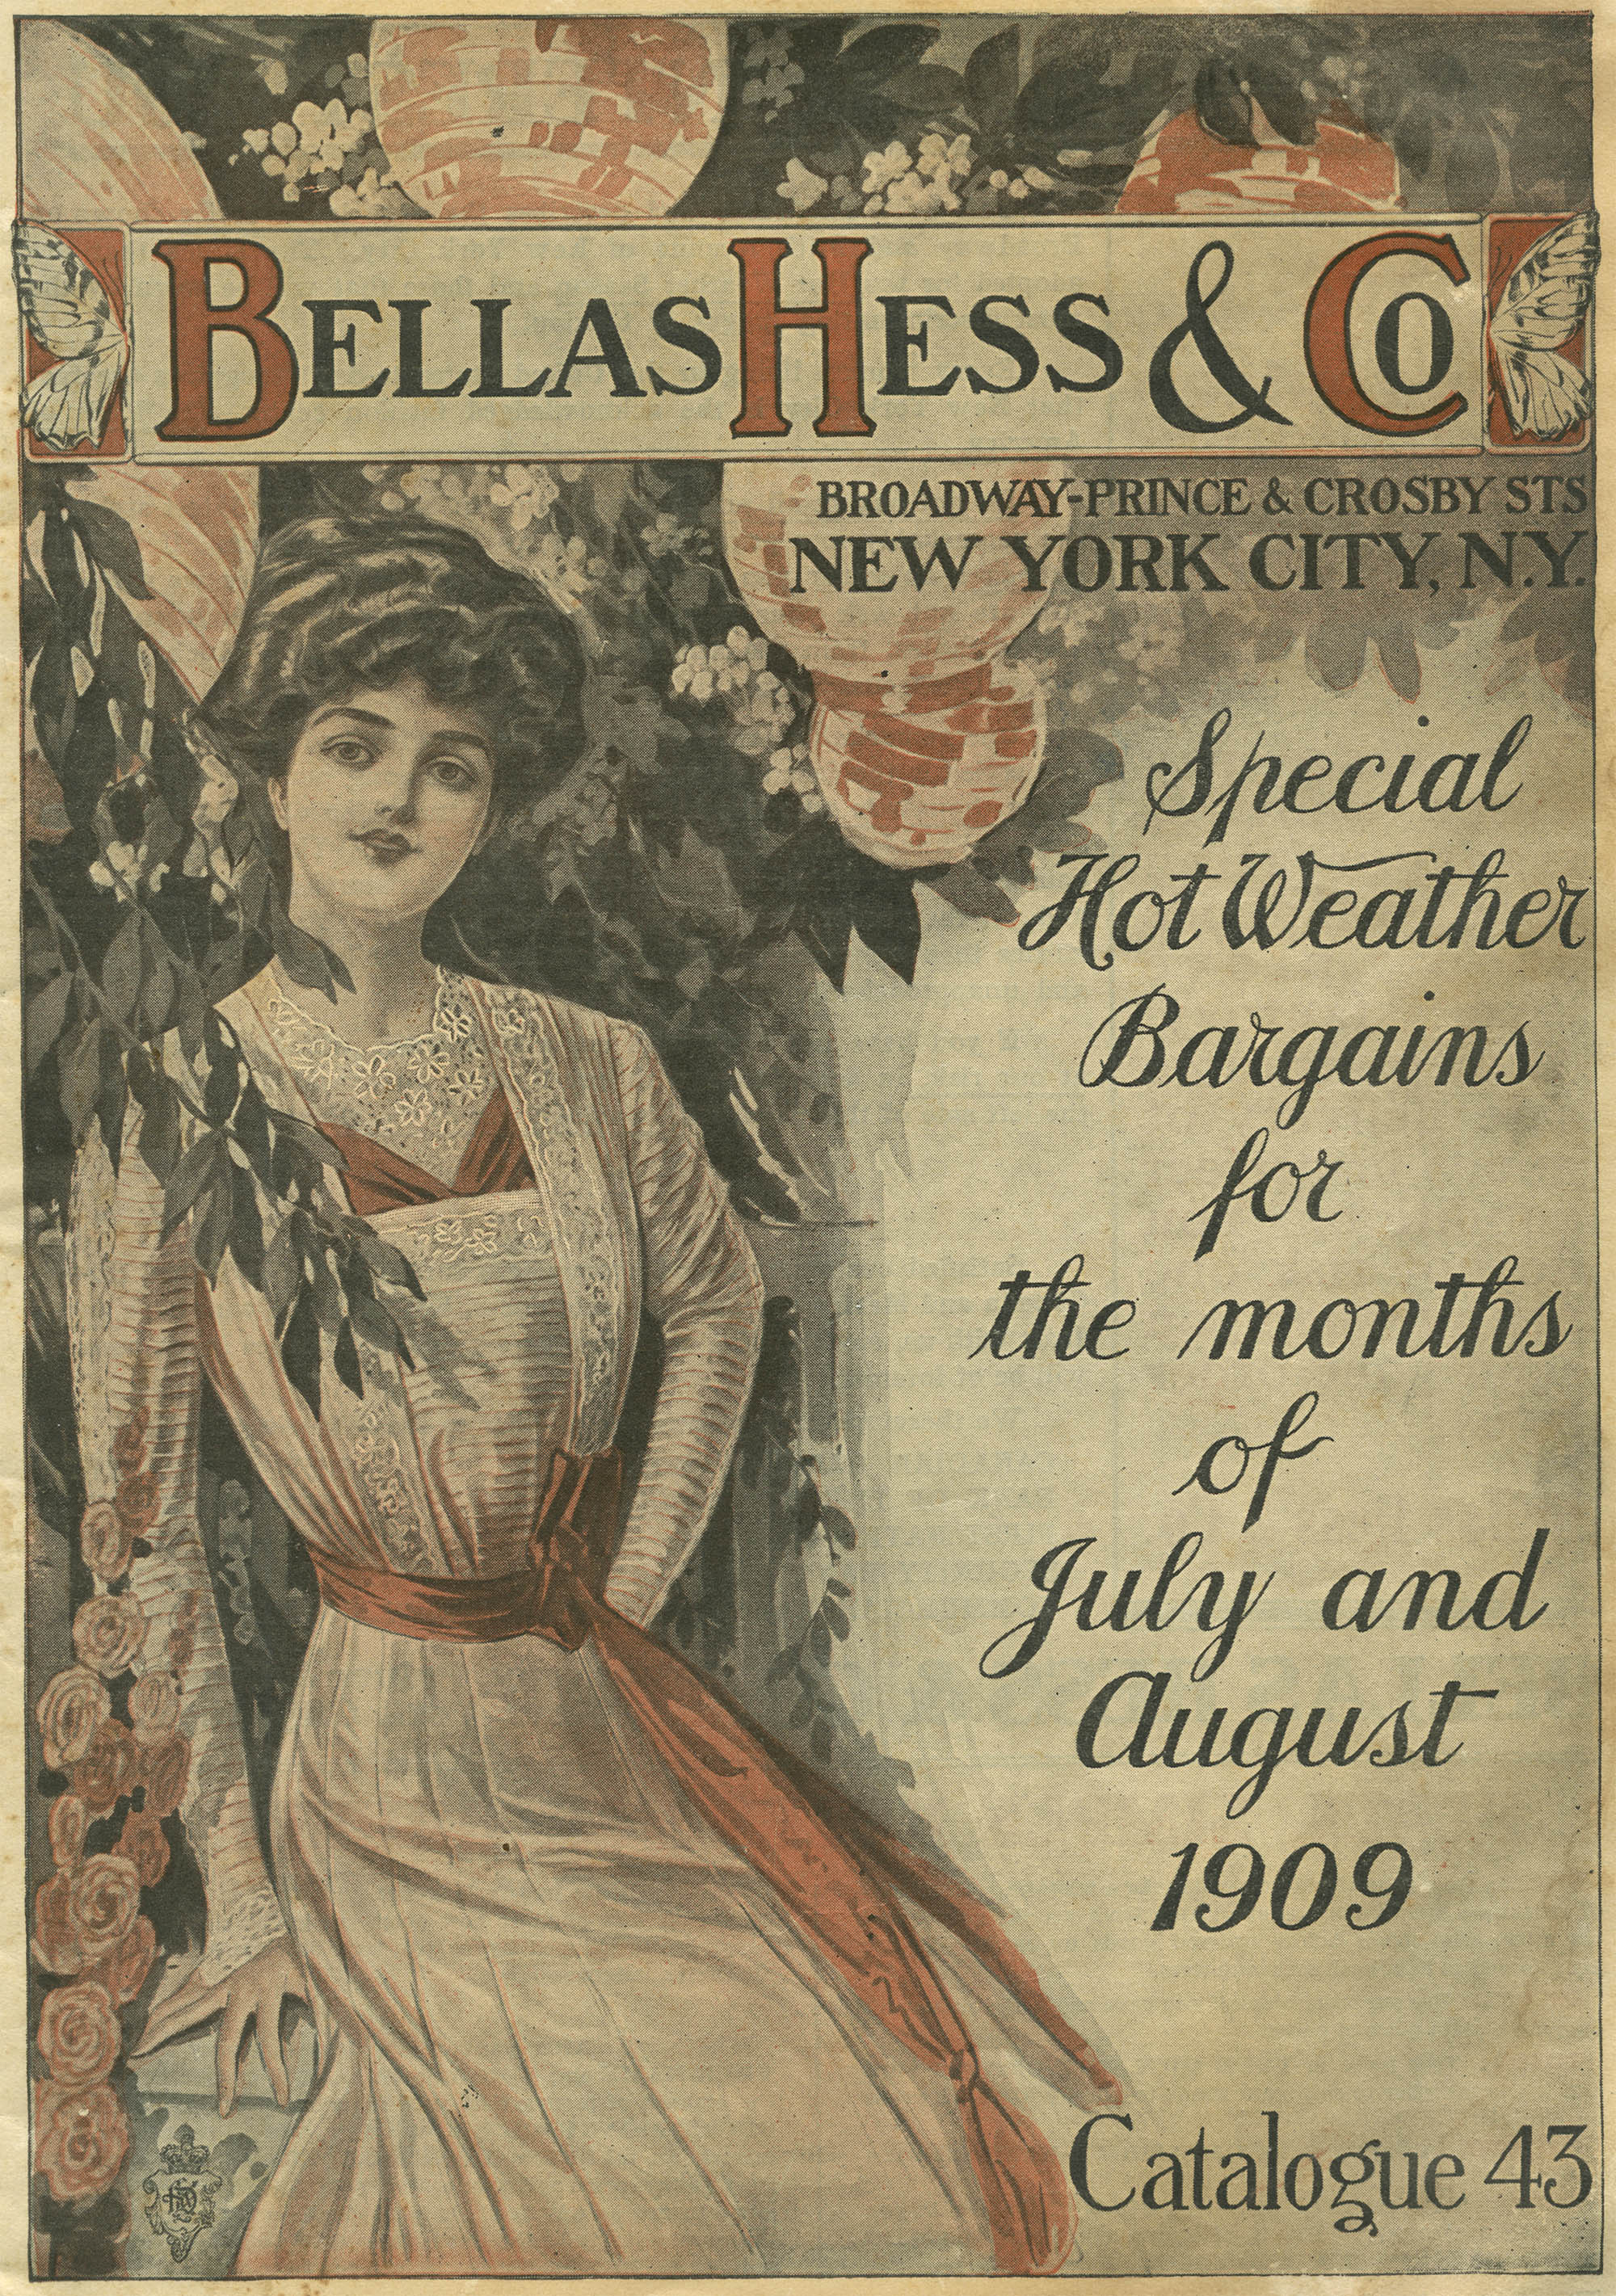 Mail order catalog cover featuring a woman in 1909 style dress.